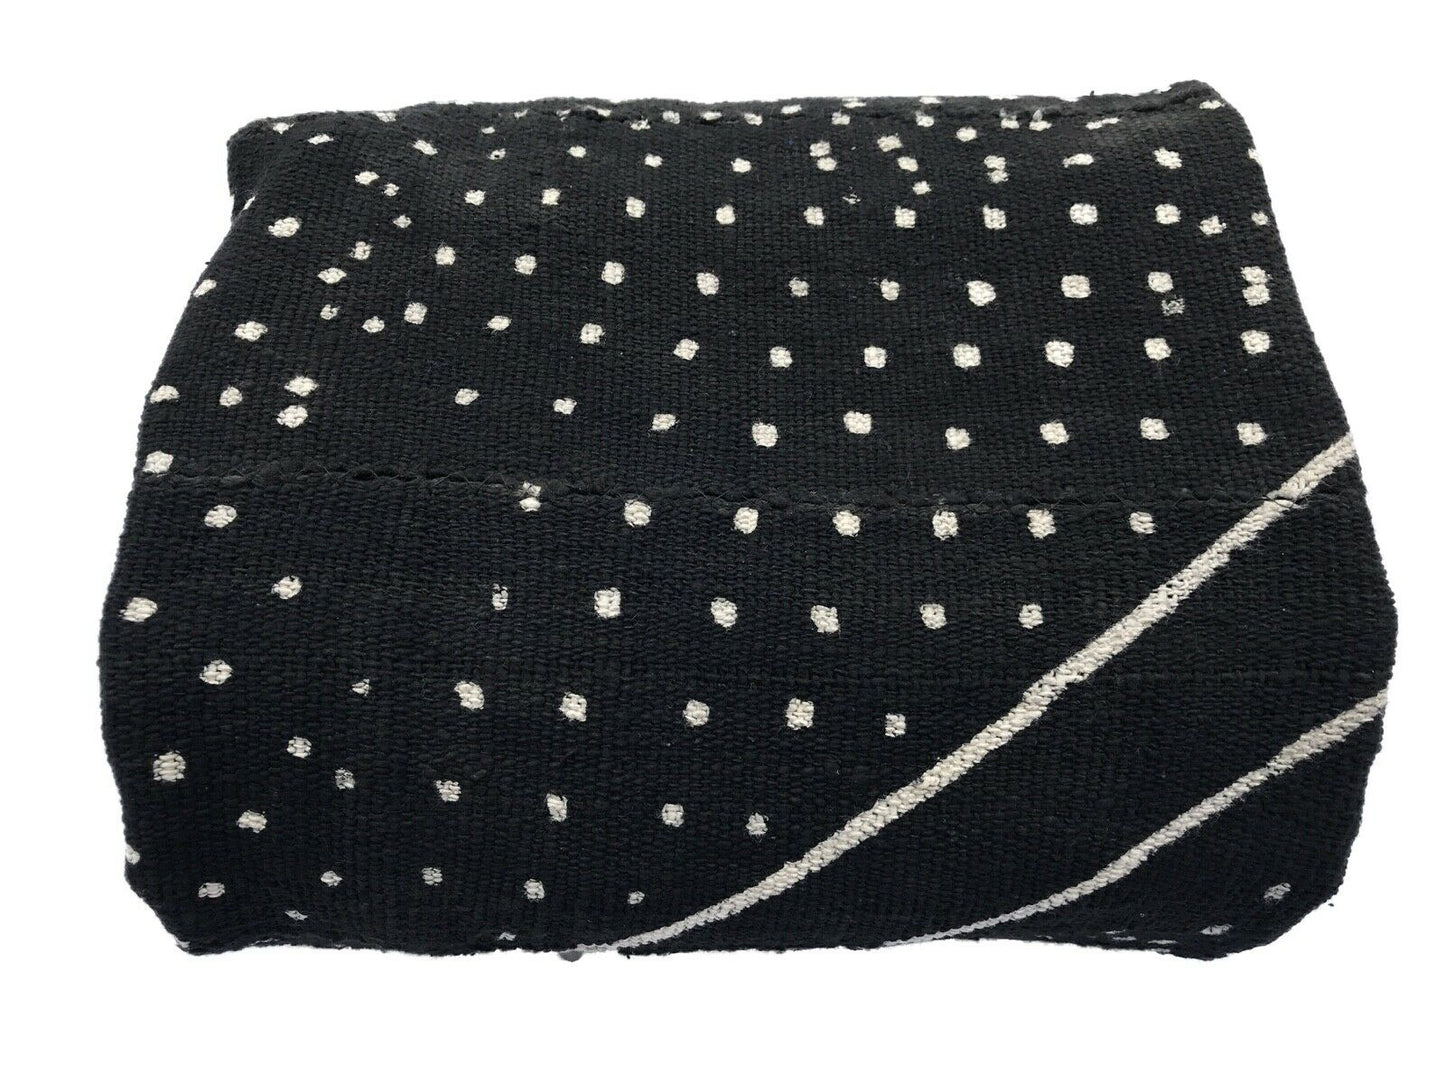 African LG Black and White Mud Cloth Textile / Blanket  Mali 62" by 90" #105